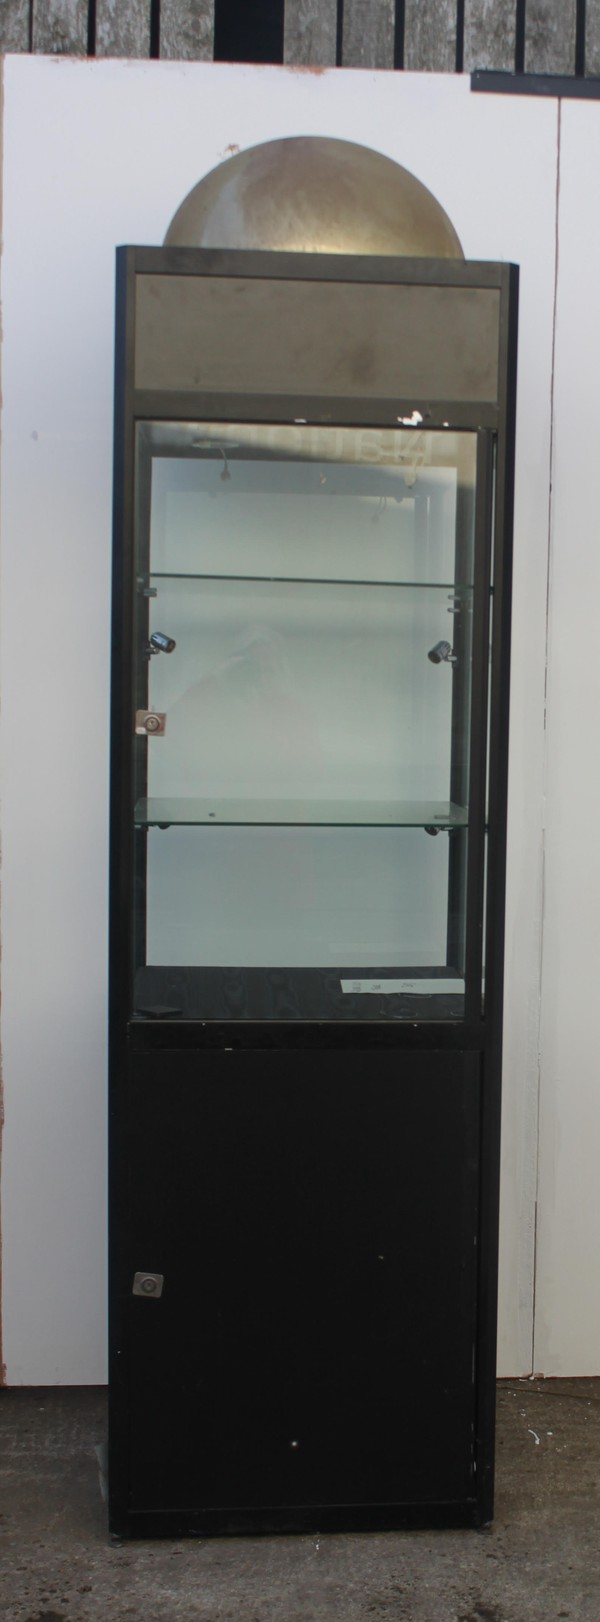 3x Black Display Cabinet With Domed Top For Sale